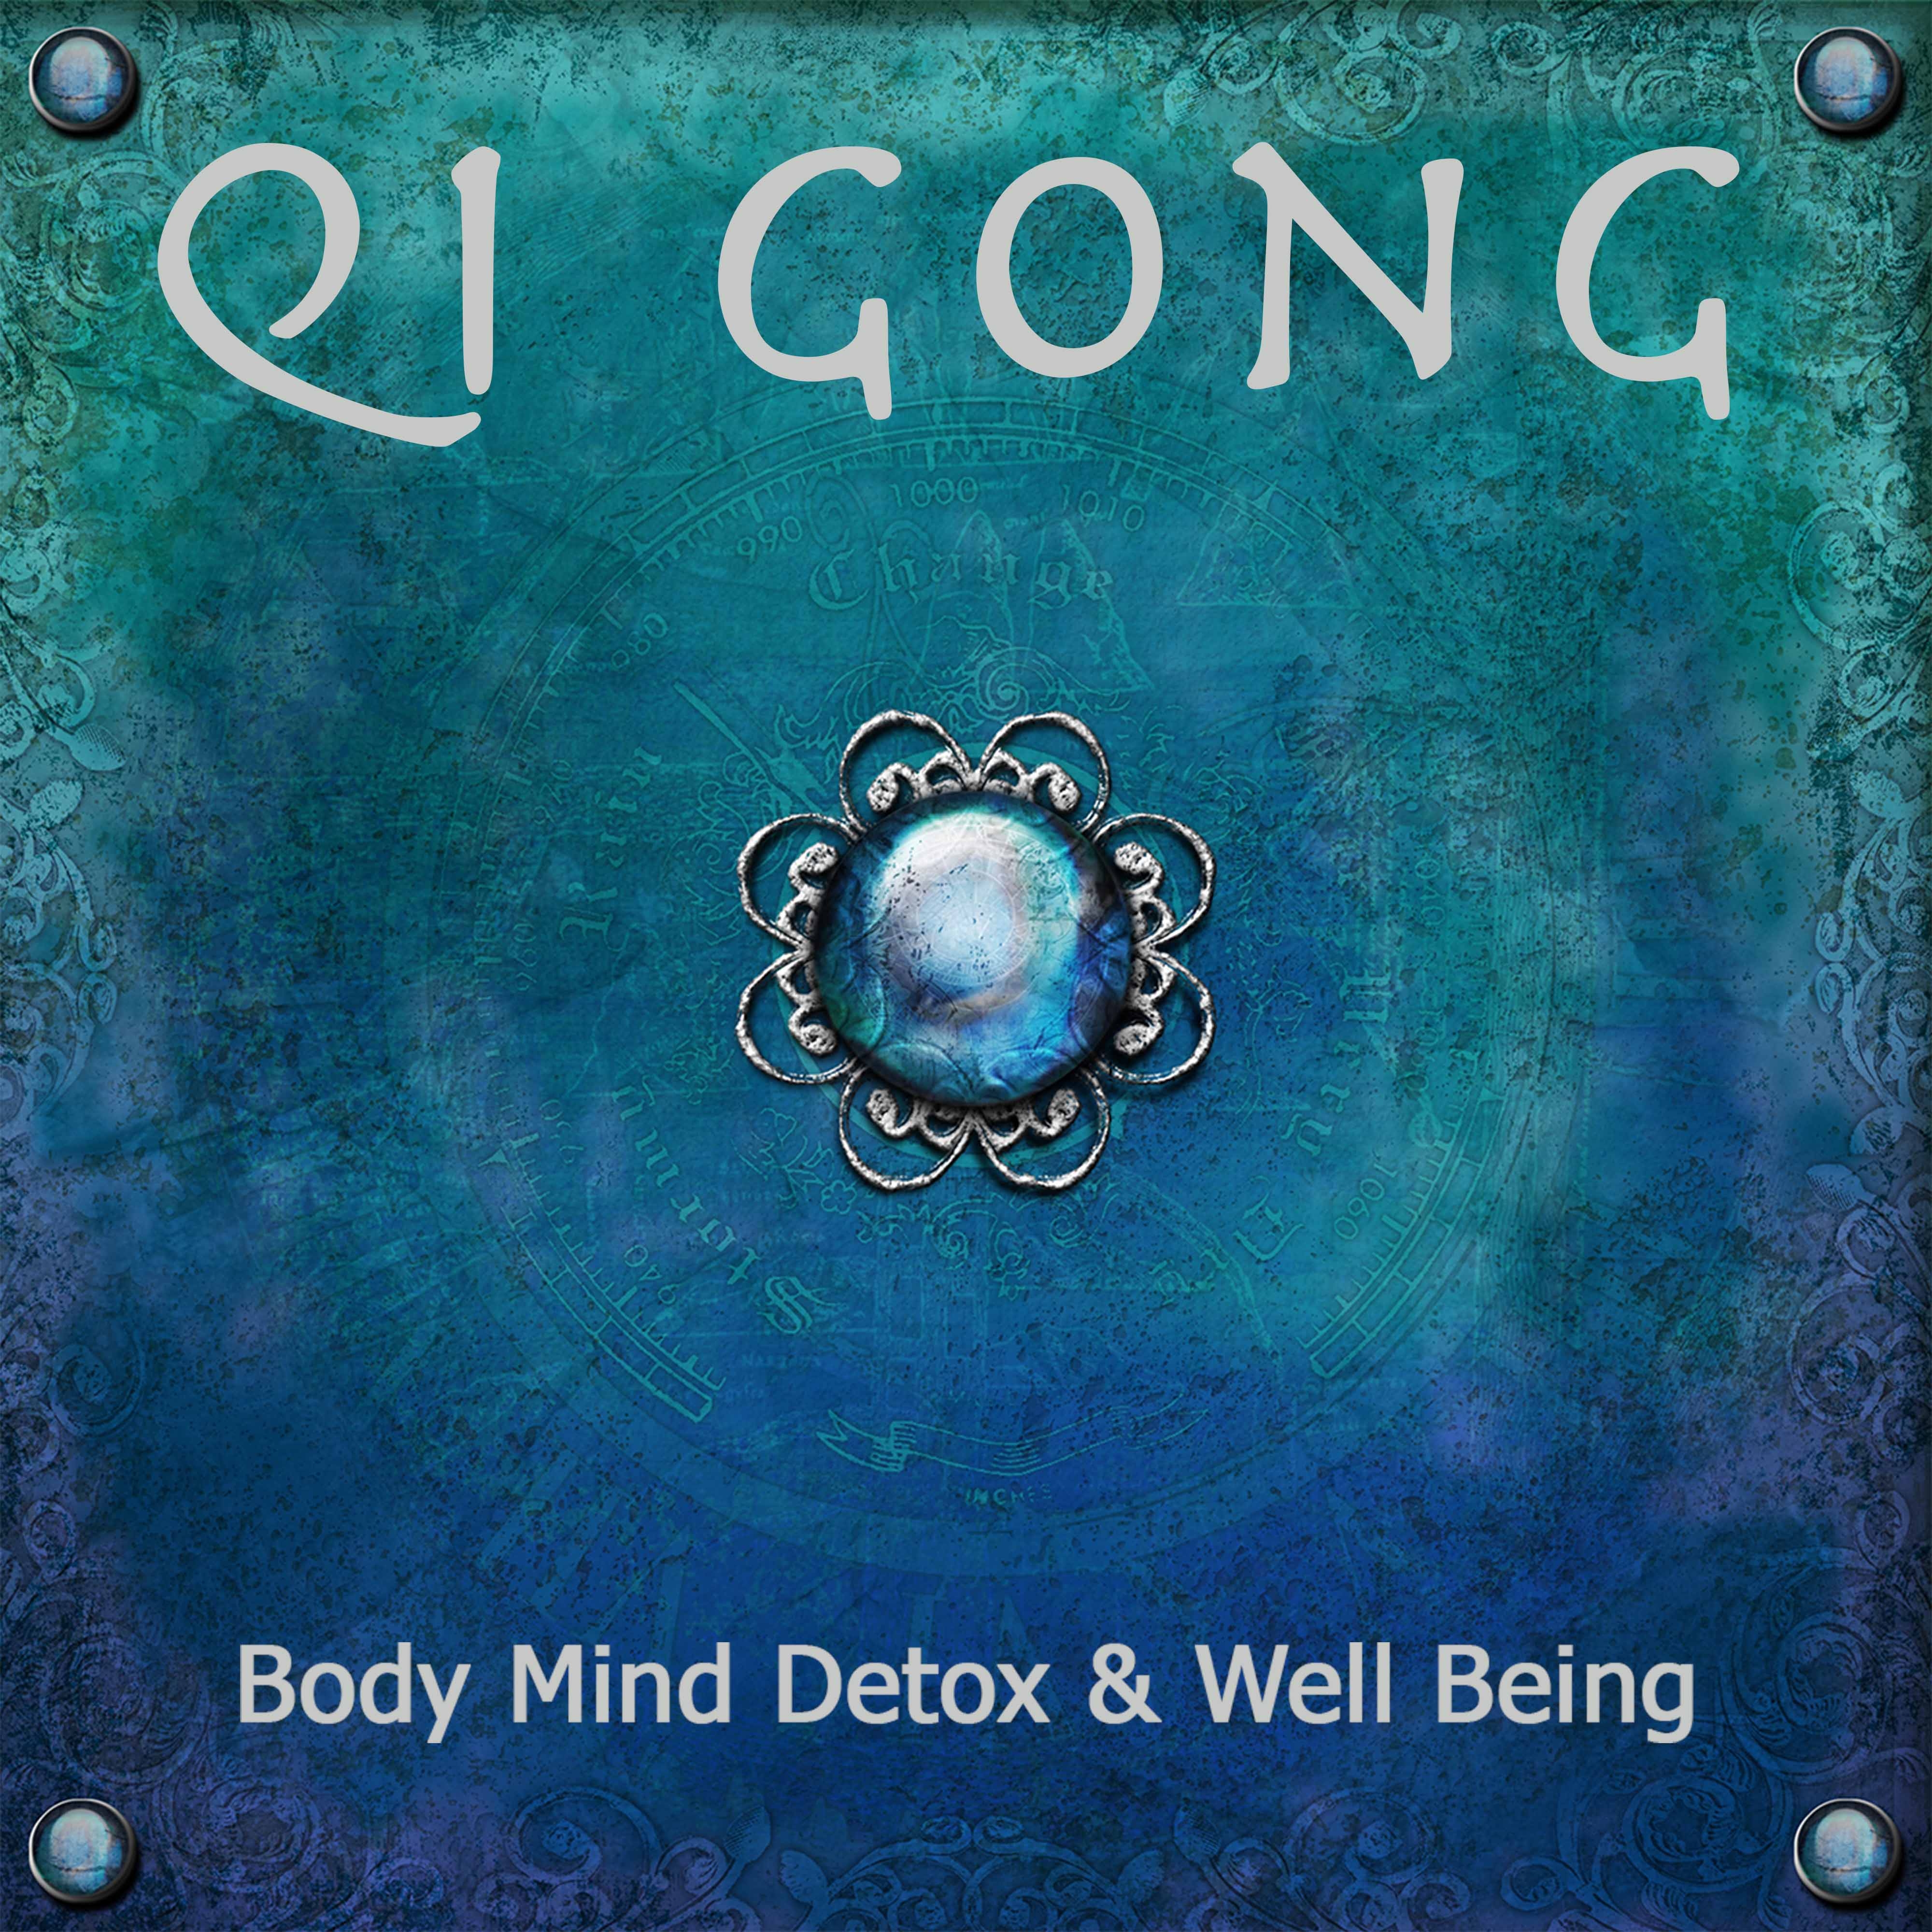 Qi Gong: New Age Soothing Music, Relaxation Meditation Music for Body Mind Detox & Well Being